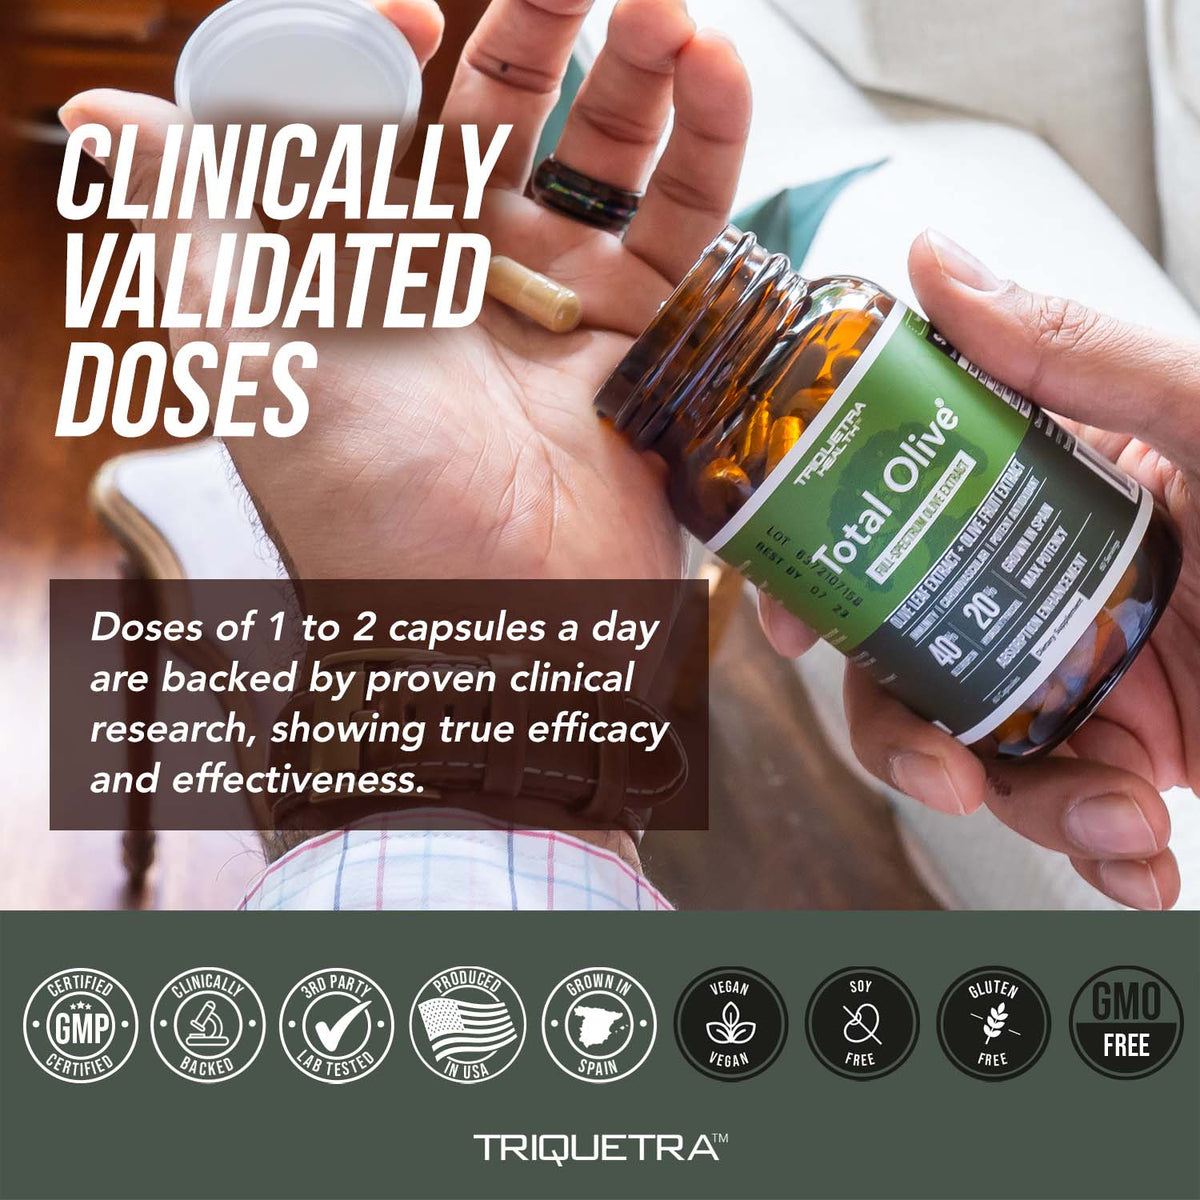 Total Olive (Olive Leaf Extract + Olive Fruit Extract)